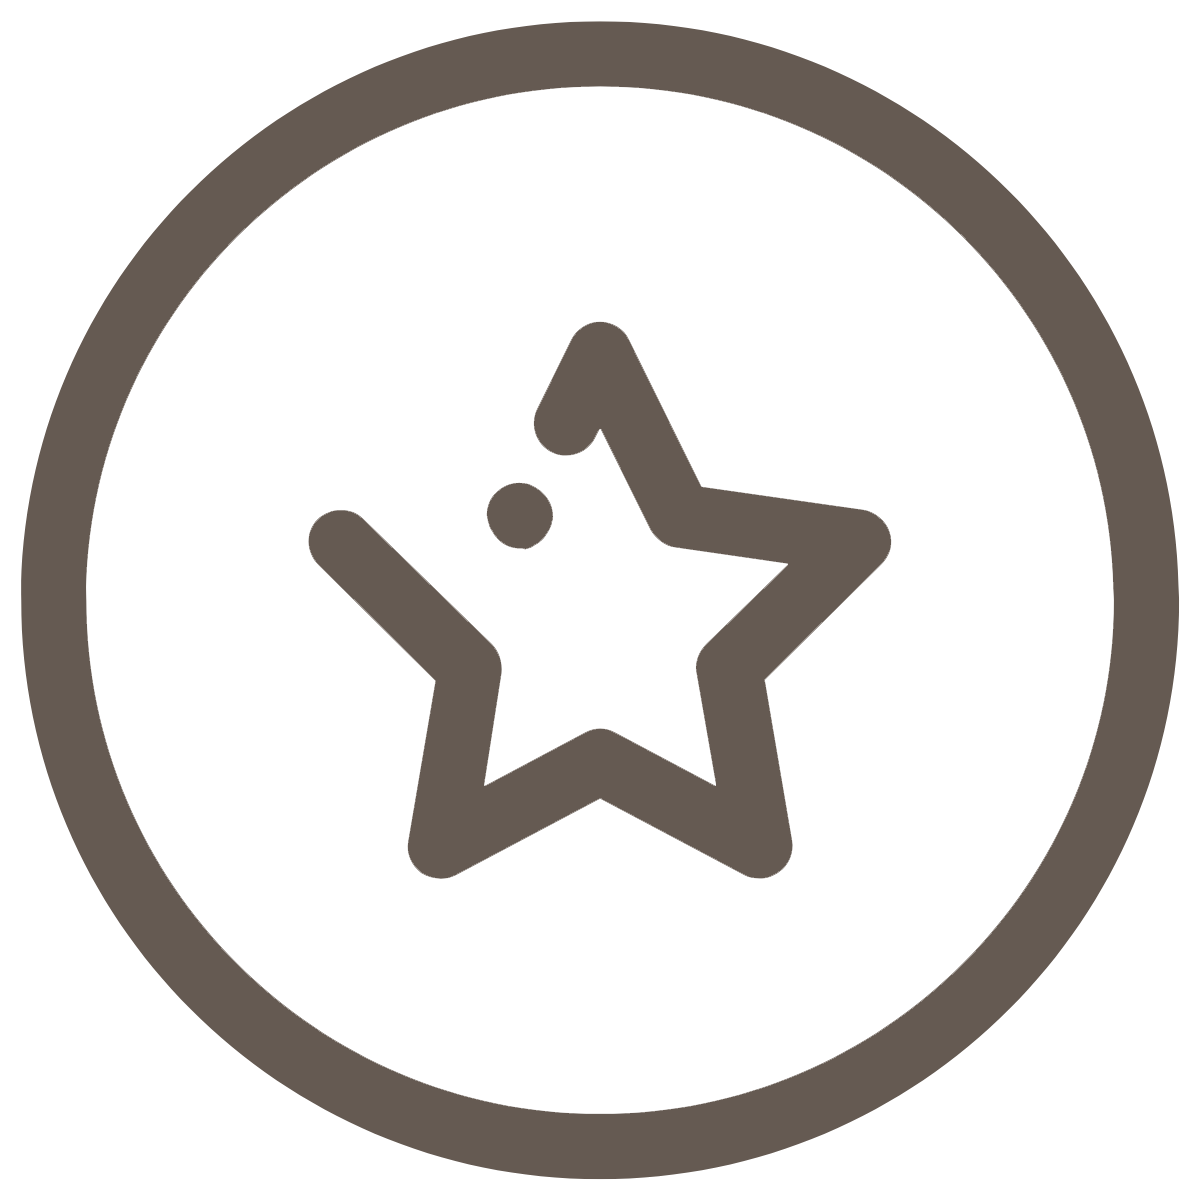 Star feature icon